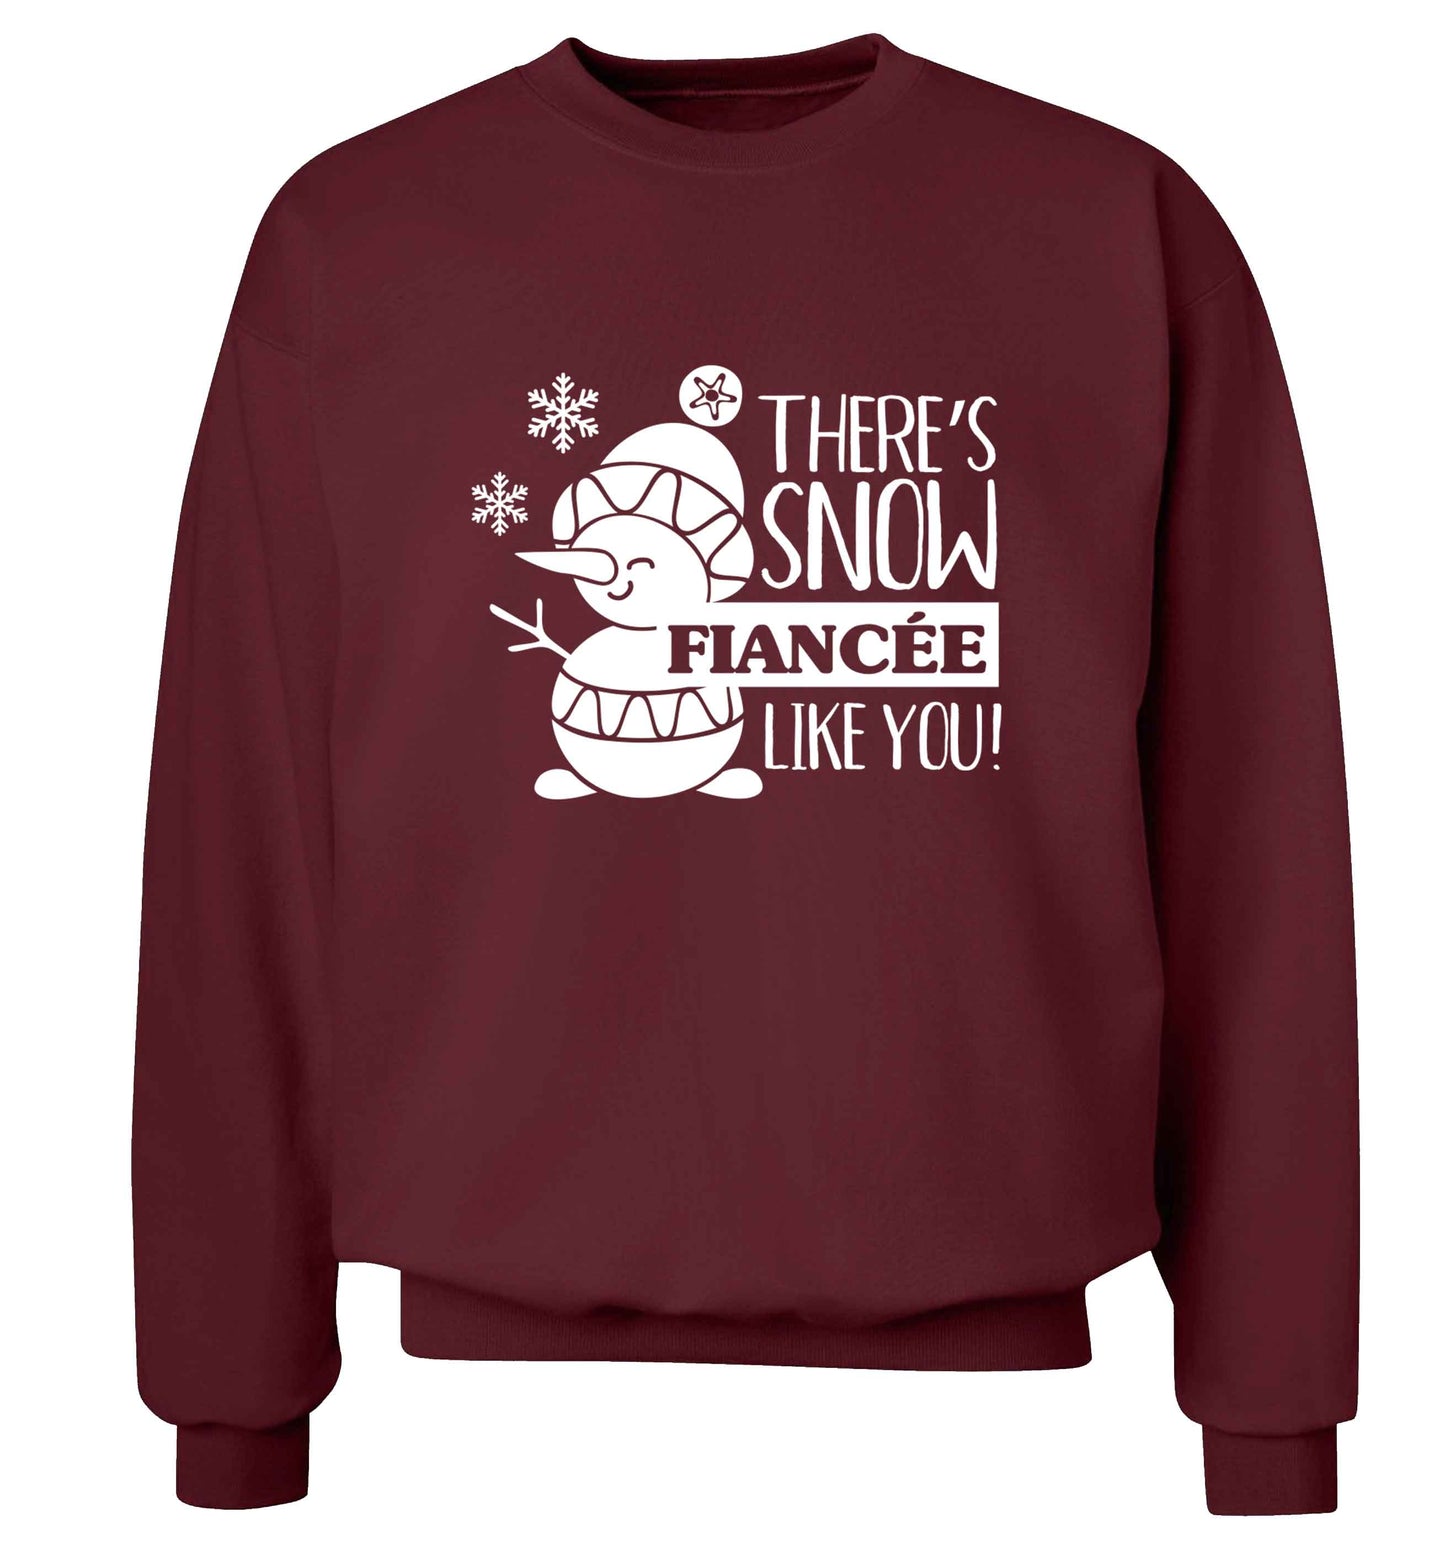 There's snow fiancee like you adult's unisex maroon sweater 2XL